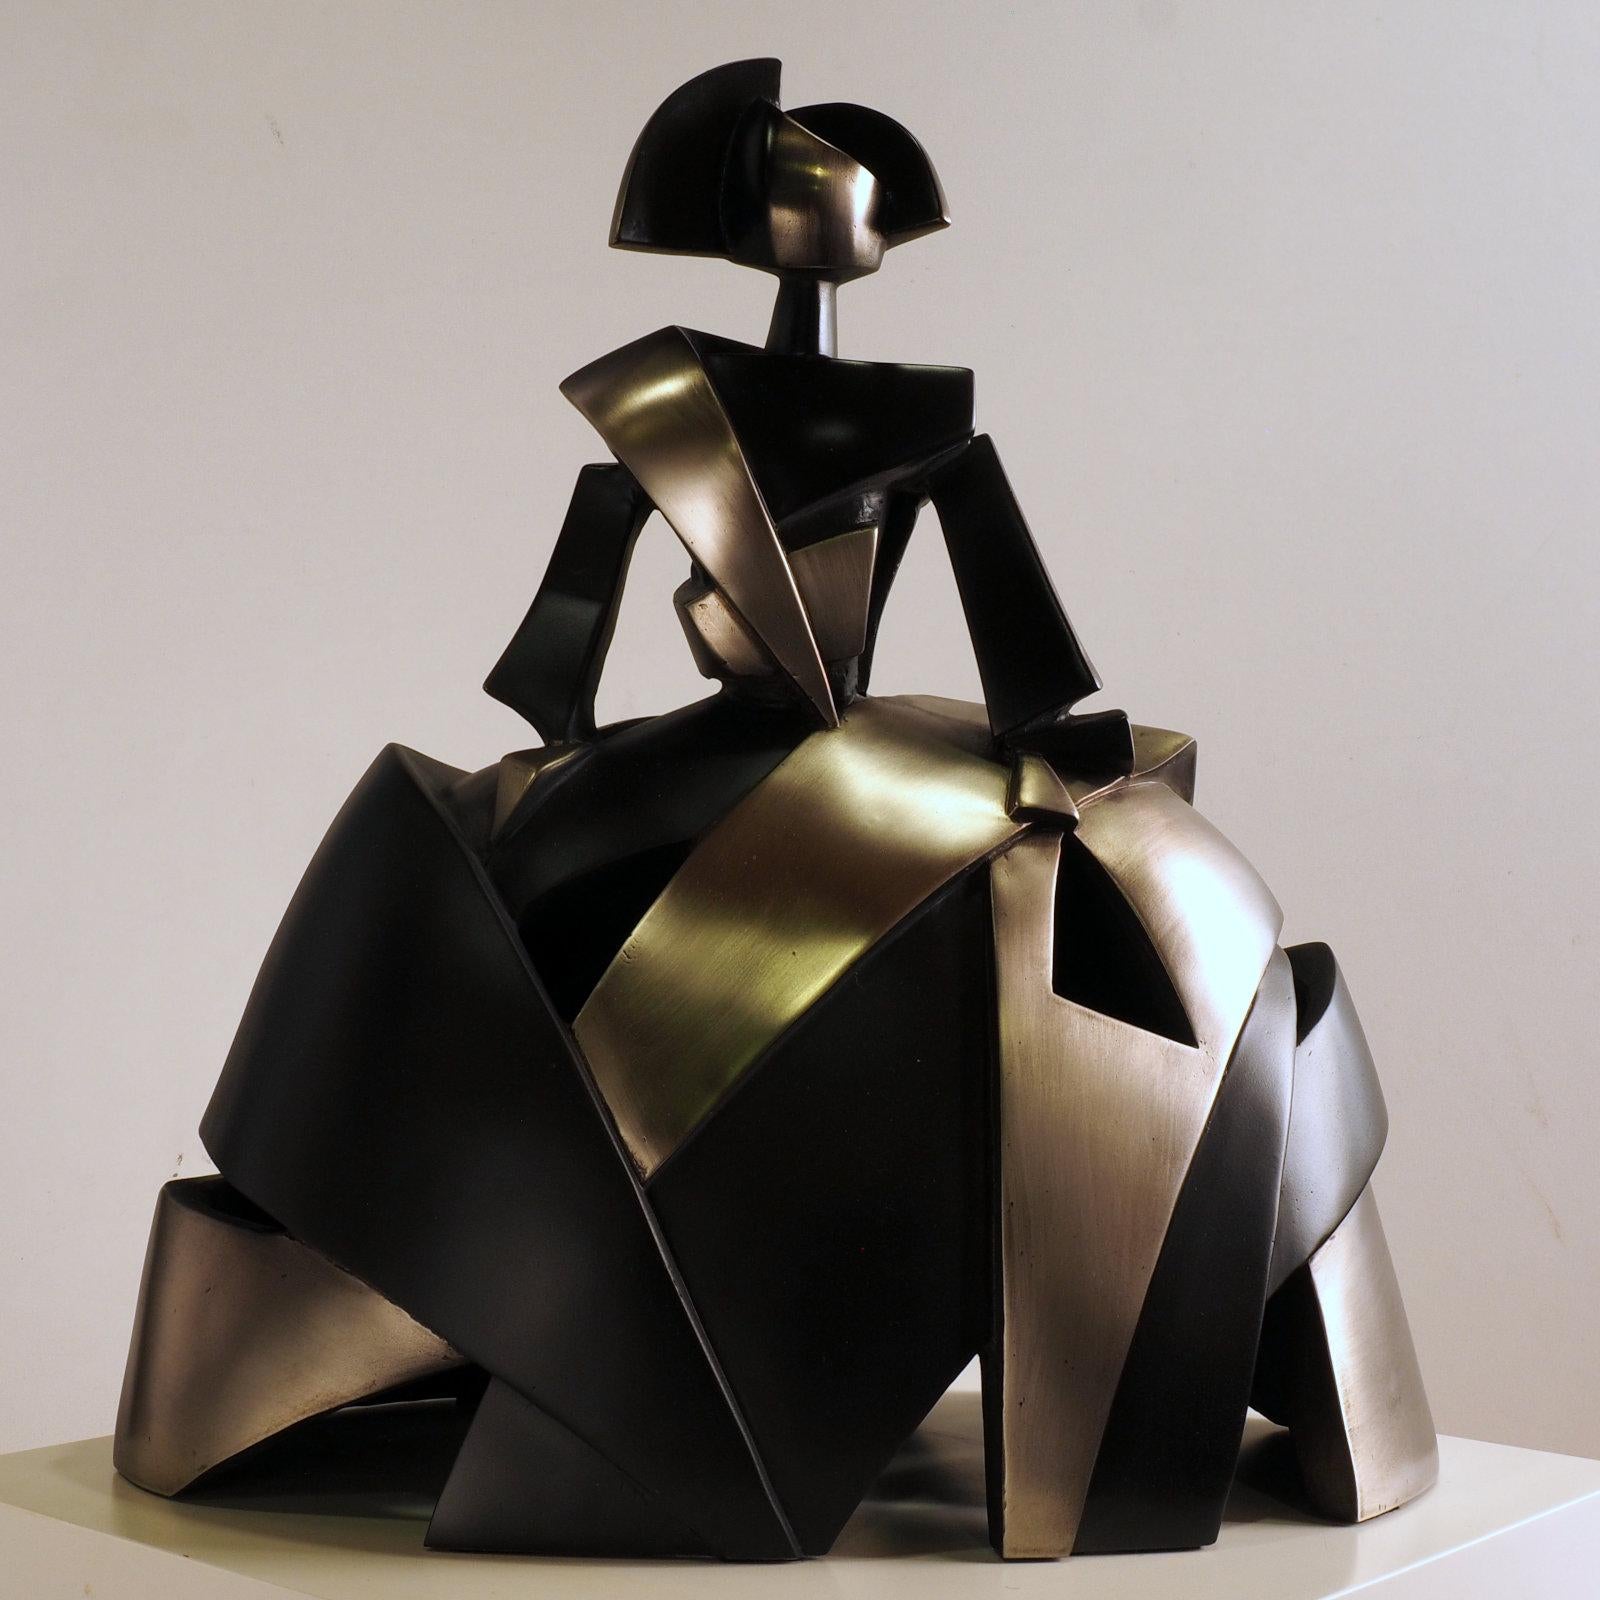 Cubist Sculpture "Infant Girl Air and Metal" by Miguel Guía.
The sculpture is made of a layer of nickel on cold smelting of copper with the base of graphite or marble dust.
Limited edition of 150 works.
Although the required time to deliver a